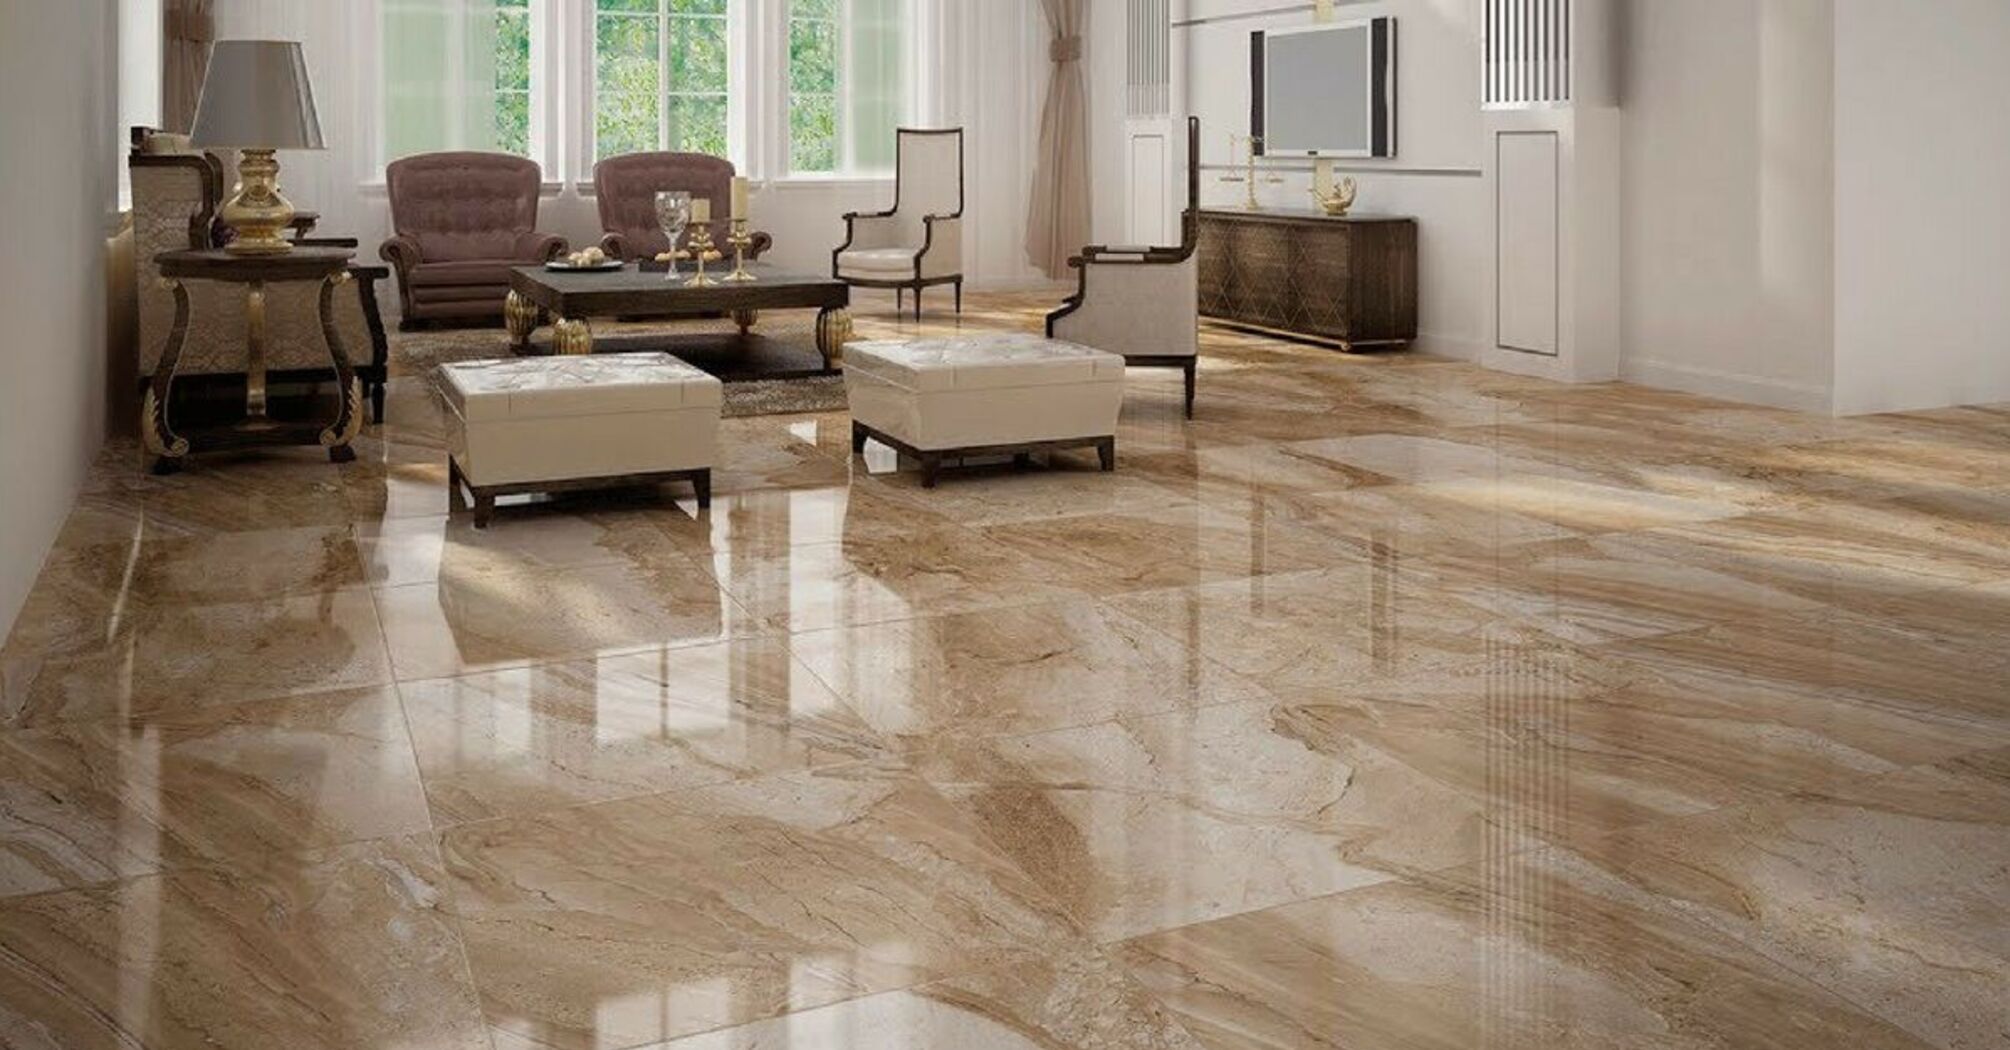 Advantages and disadvantages of marble flooring in the kitchen